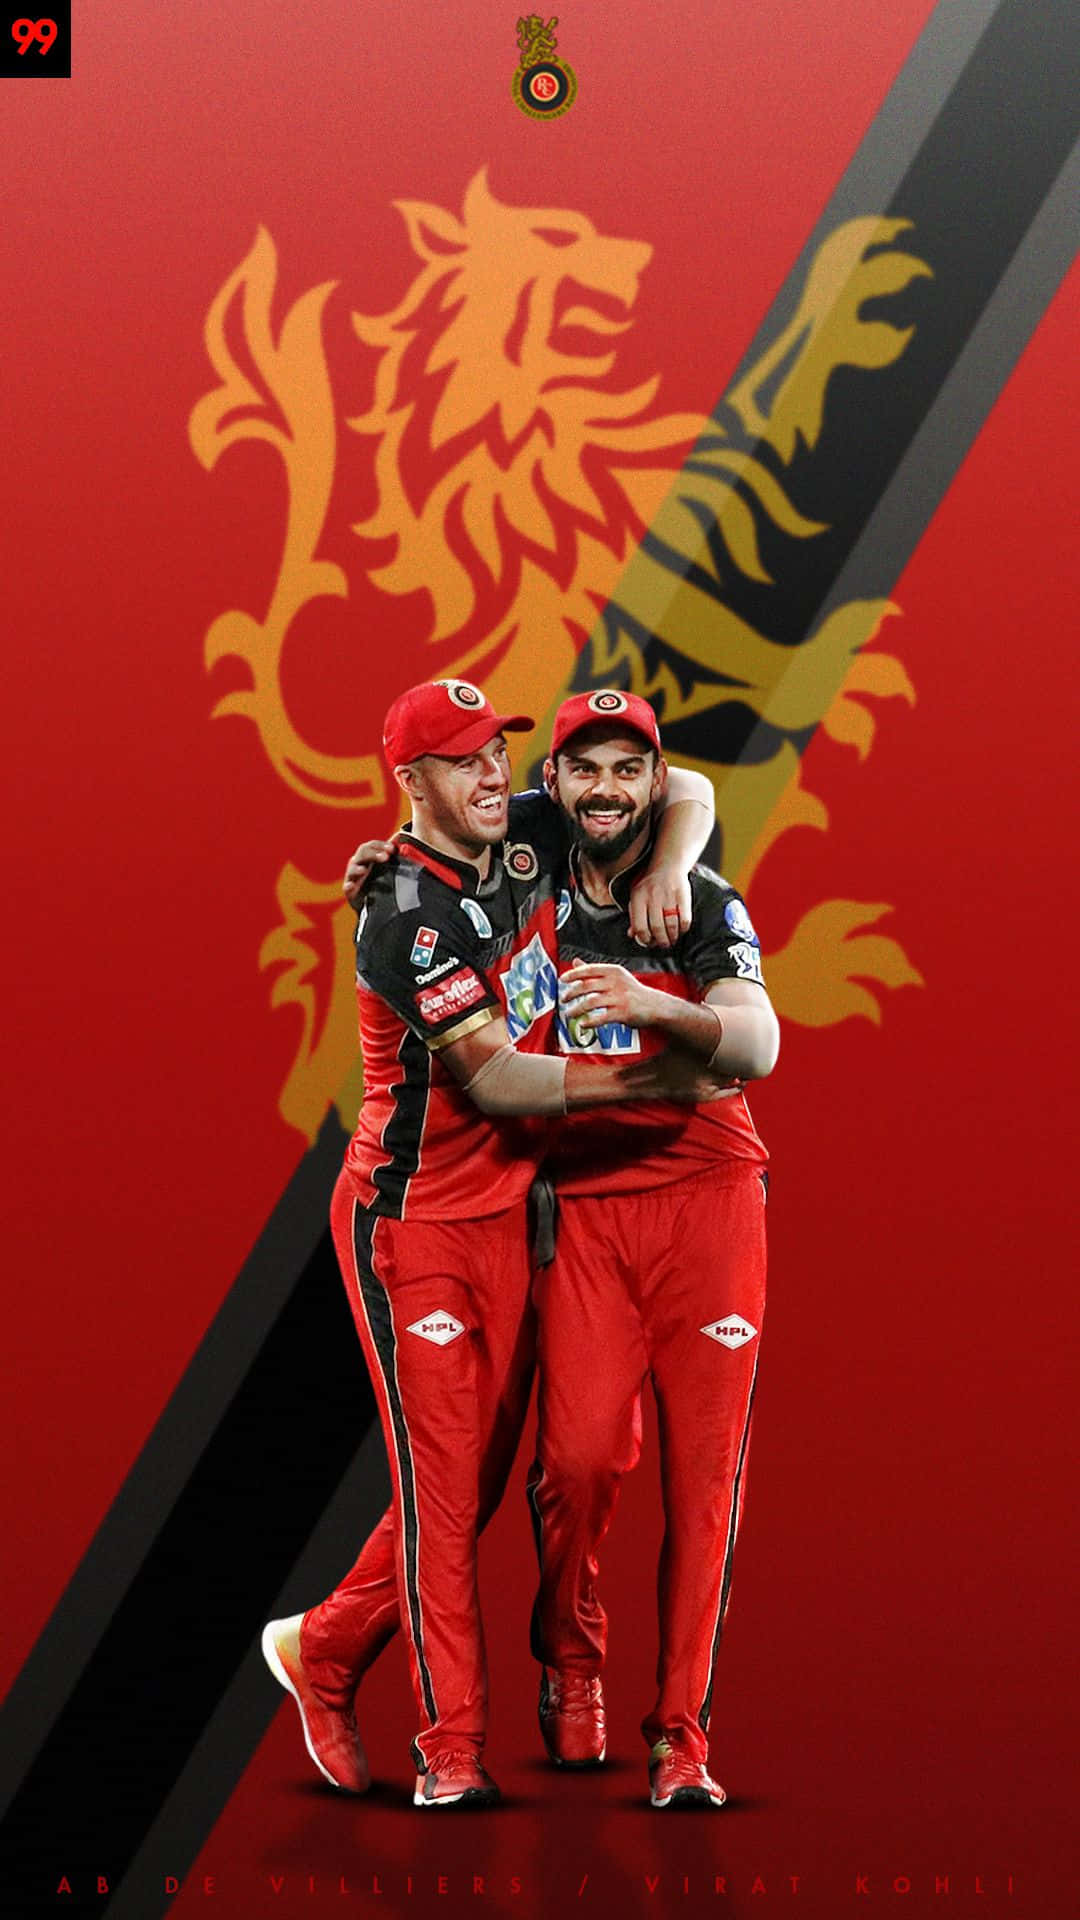 The Bangalore Royal Challengers roaring to the top